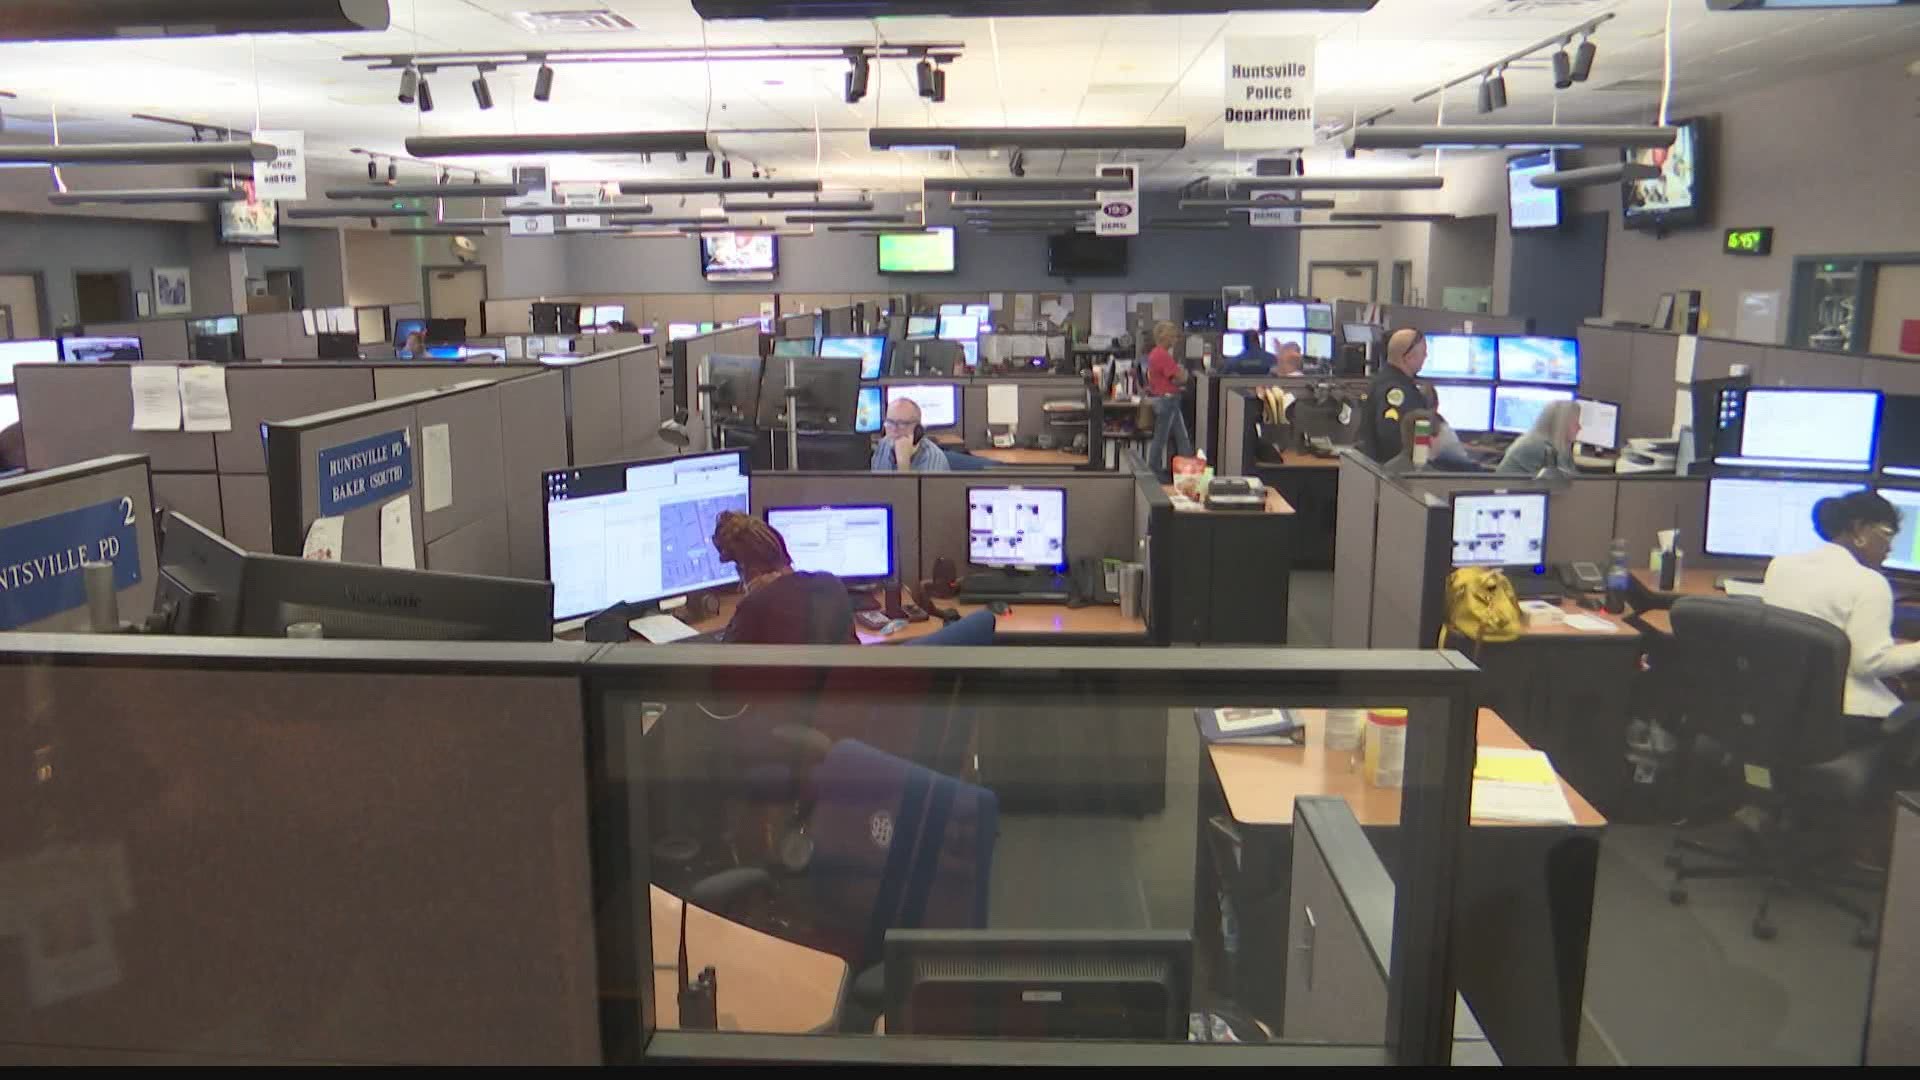 A reduction in 911 calls has first responders concerned that people aren't calling when they need to.